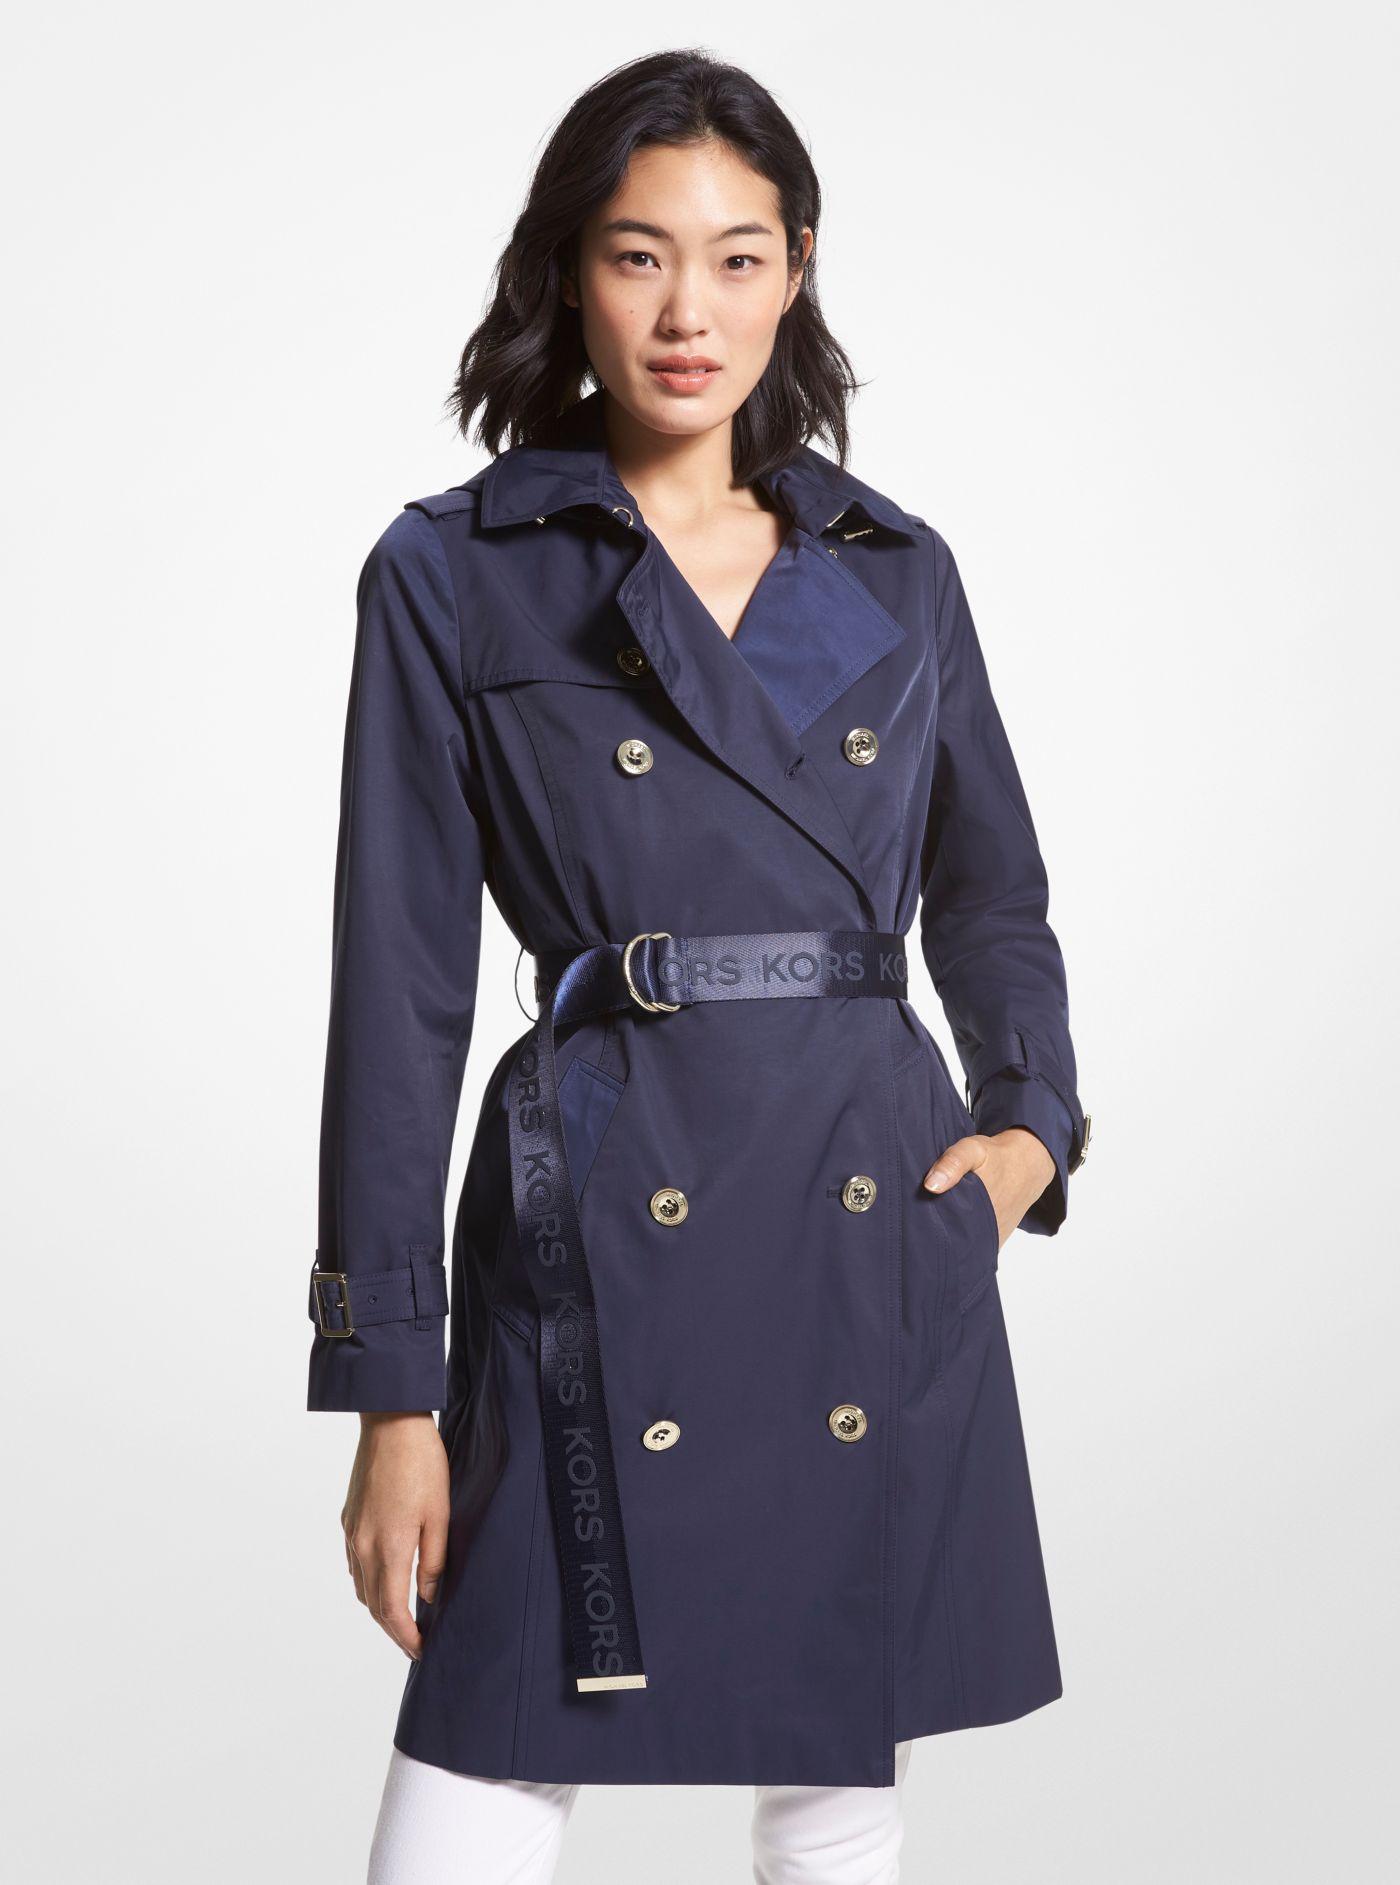 Michael Kors Cotton Blend Trench Coat in Blue | Lyst